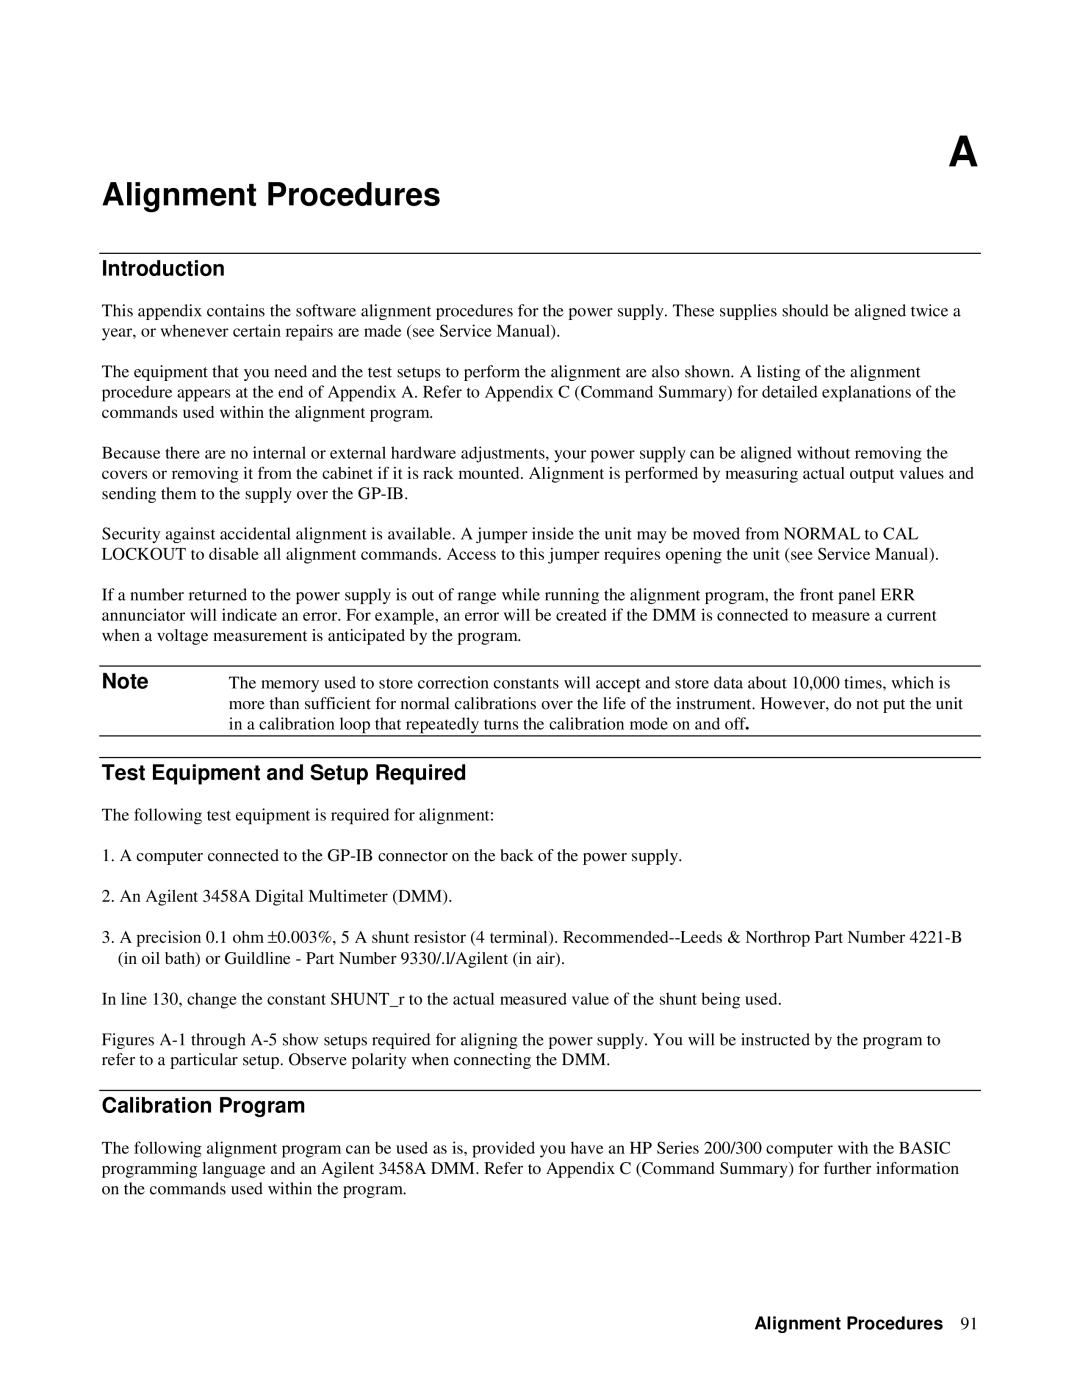 Agilent Technologies 6629A, 6626A, 6628A, 6625A Alignment Procedures, Test Equipment and Setup Required, Calibration Program 